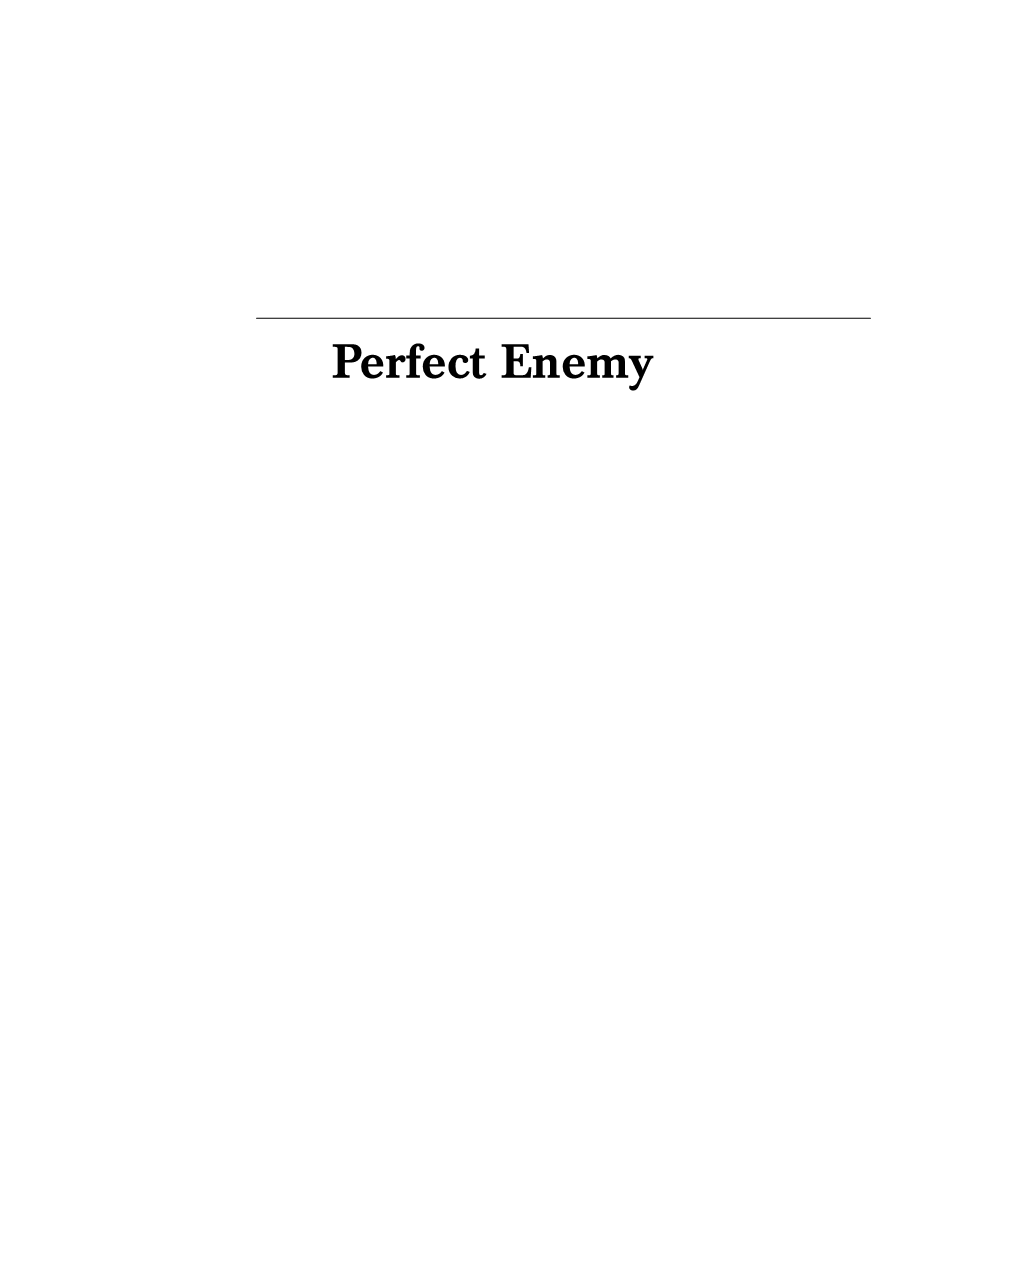 Perfect Enemy the Law Enforcement Manual of Islamist Terrorism